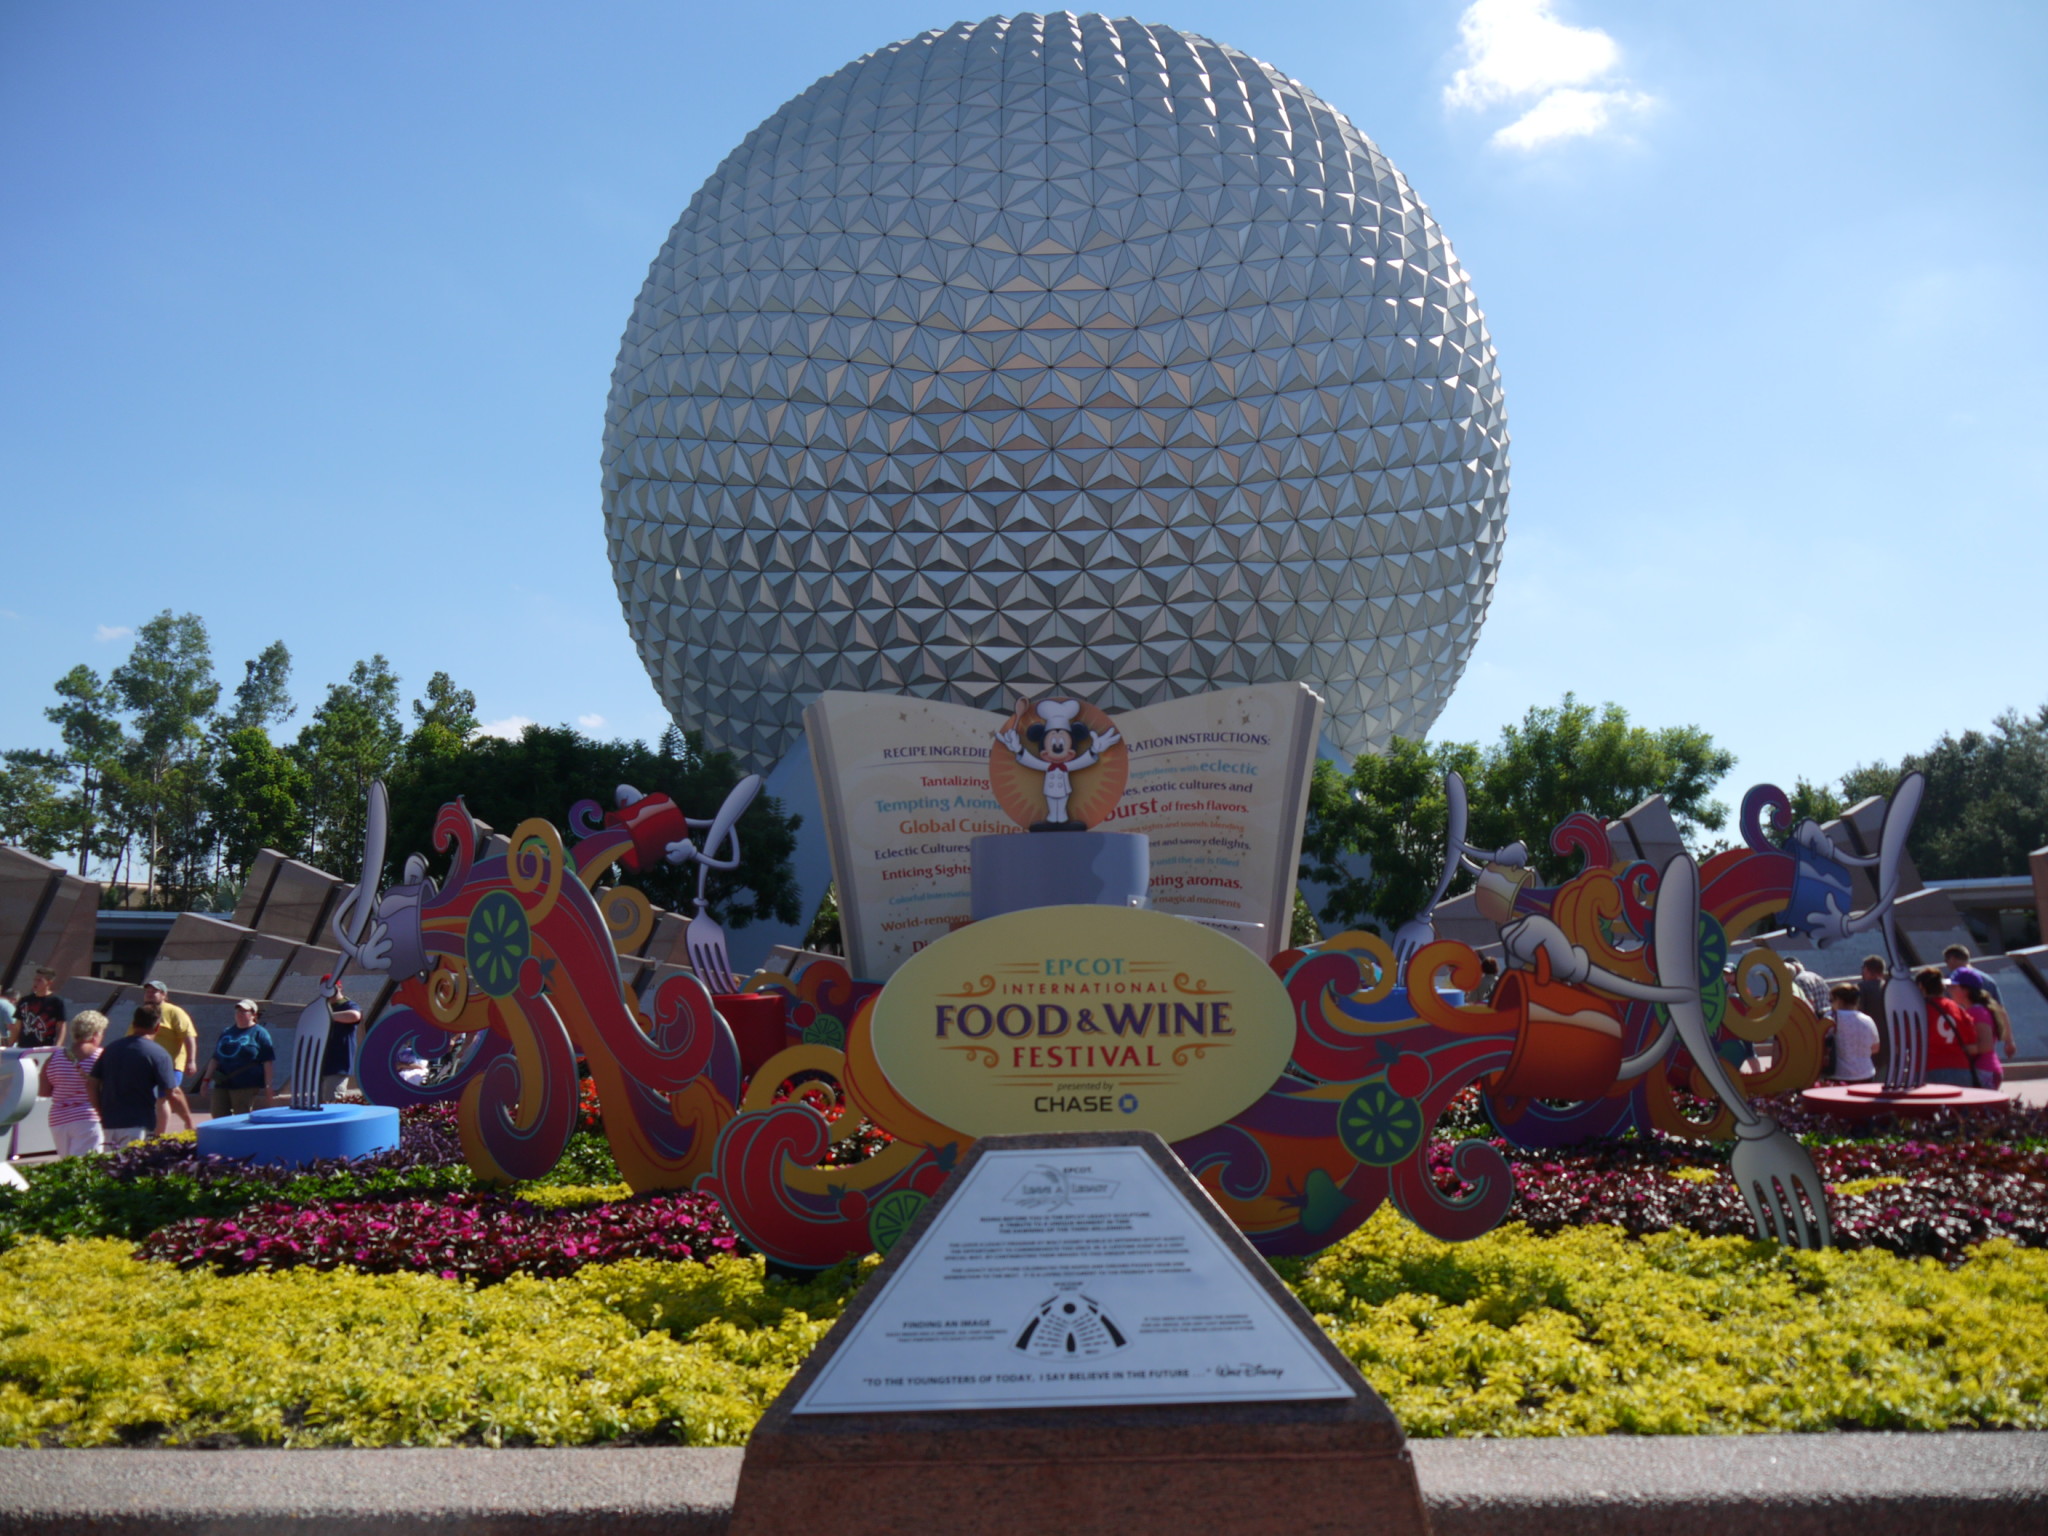 2014 Epcot International Food and Wine Festival Coming September 19th – November 10th